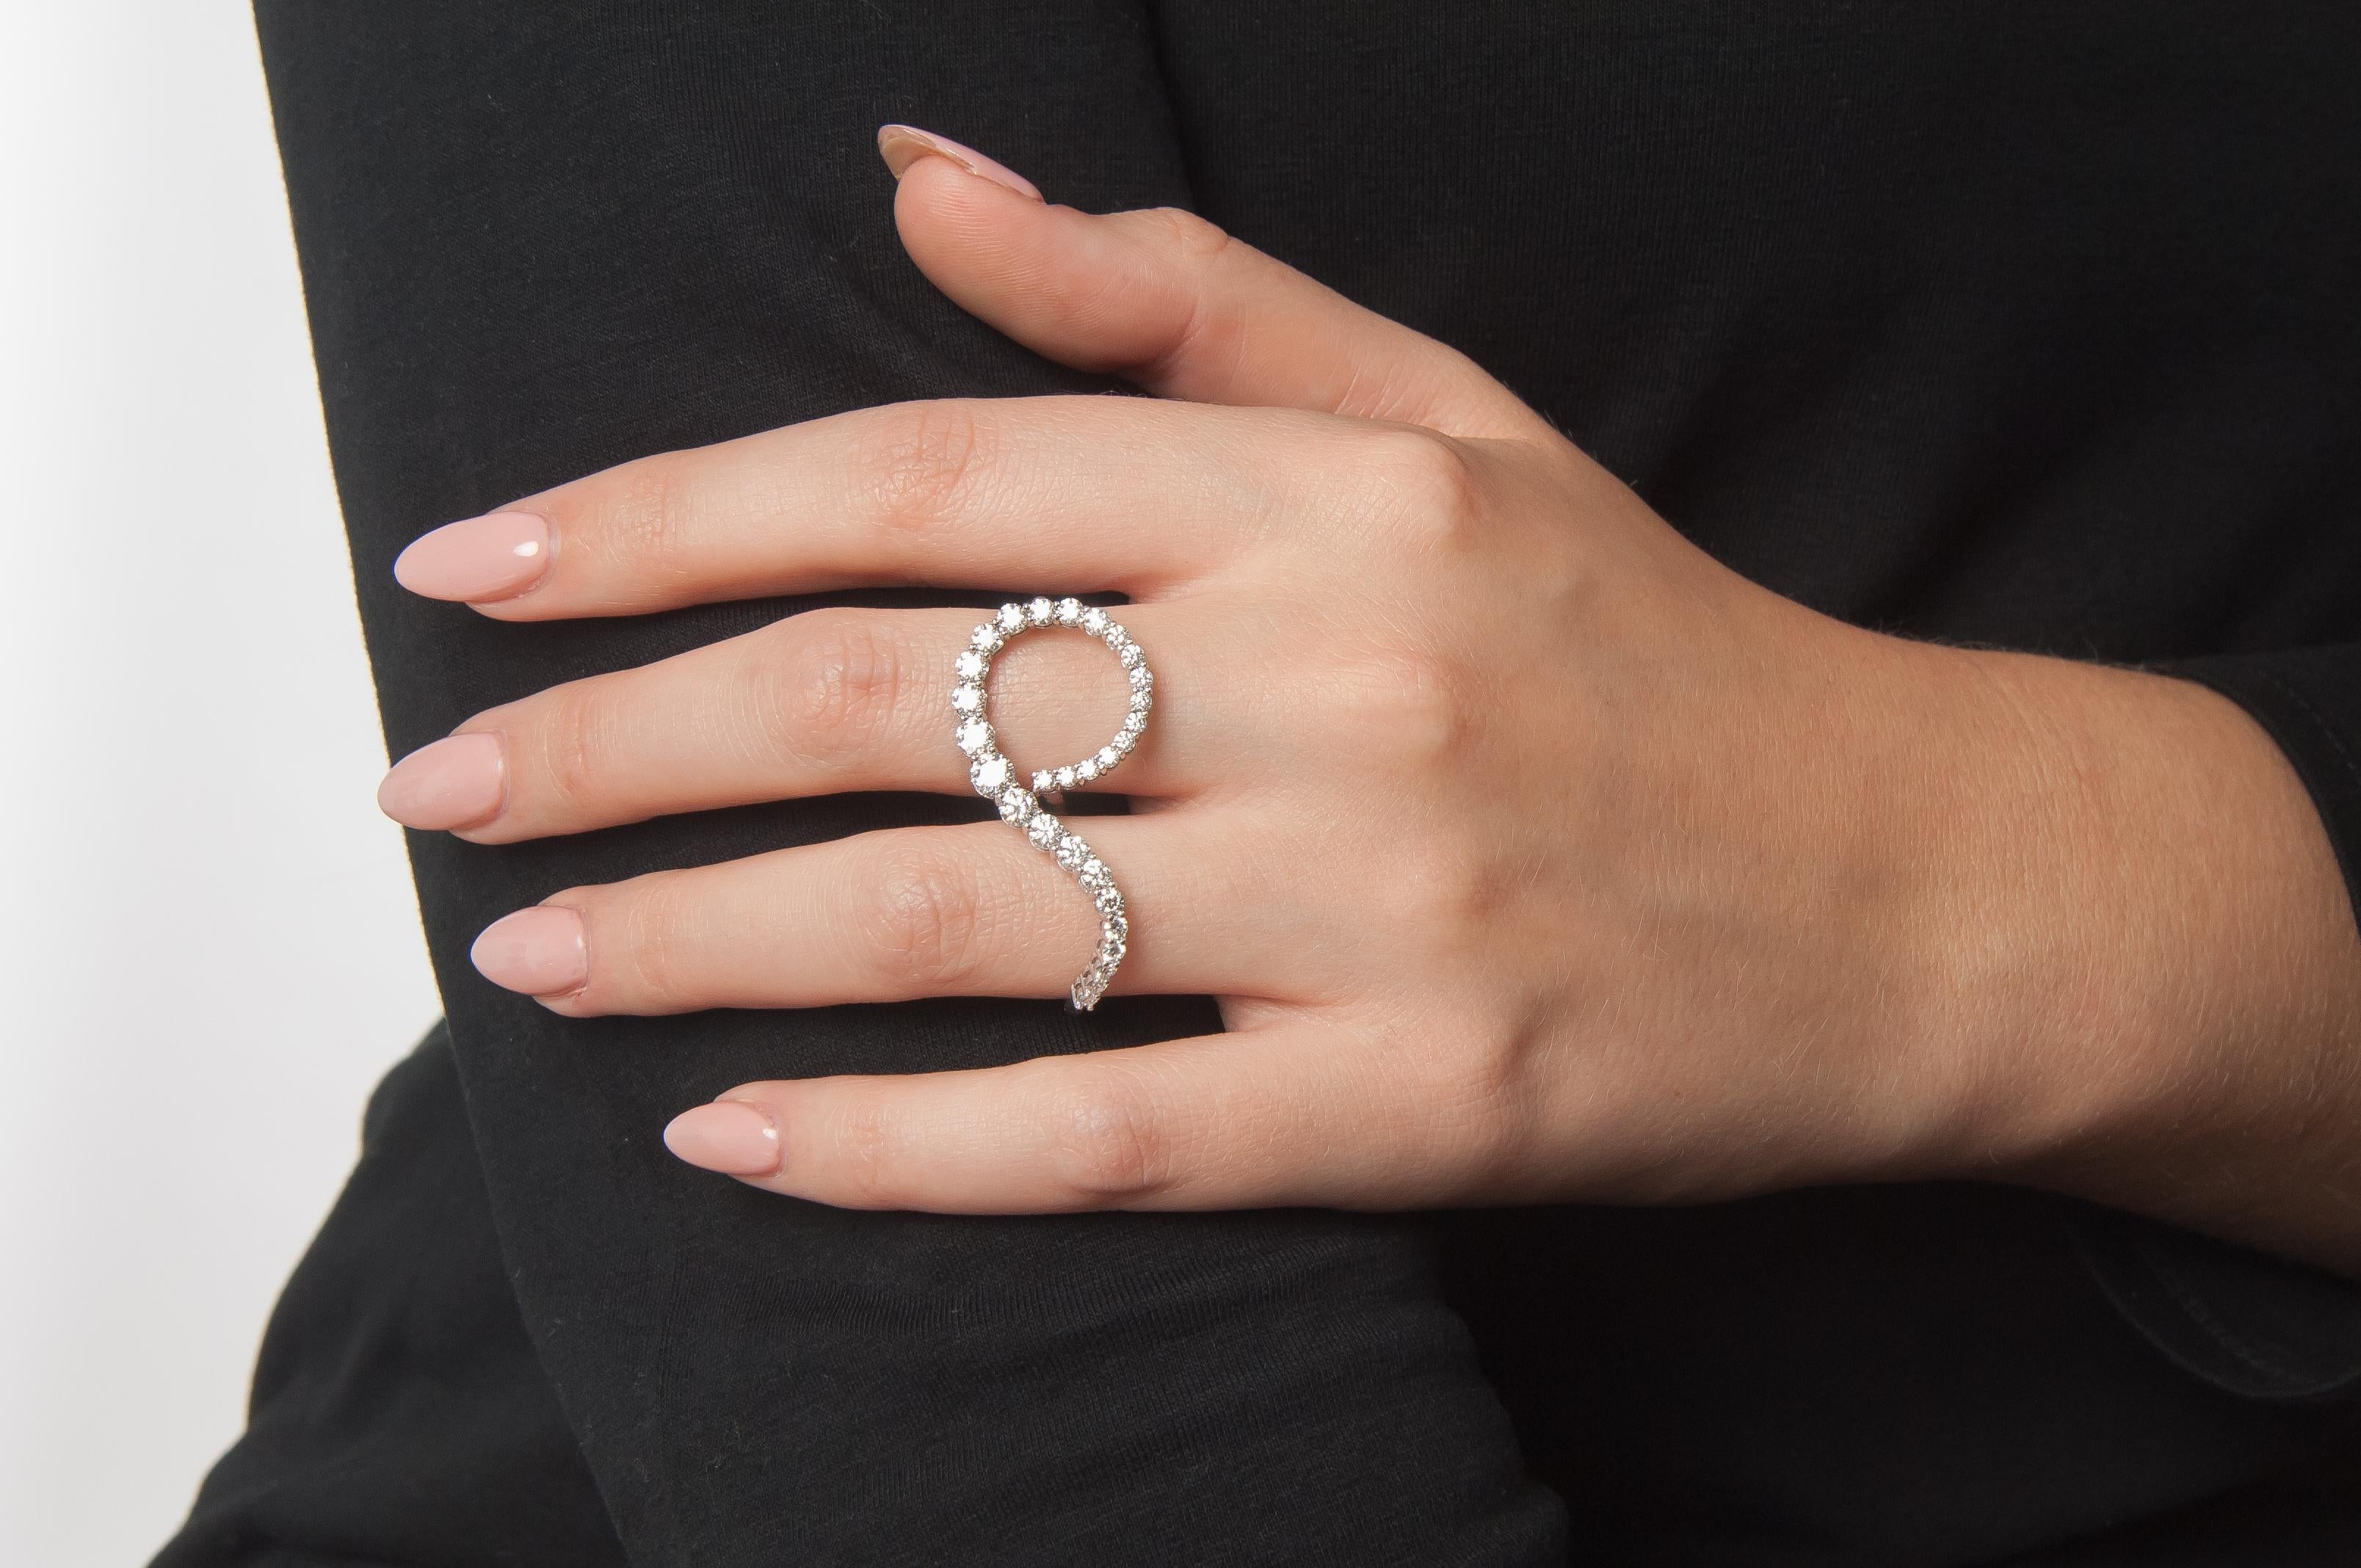 Encrusted with over 2 carats of brilliant white diamonds, this graceful ring loops across your fingers and catches the light as you move.

18K white gold two-finger diamond swirl ring
2.11 TCW
1.5” long